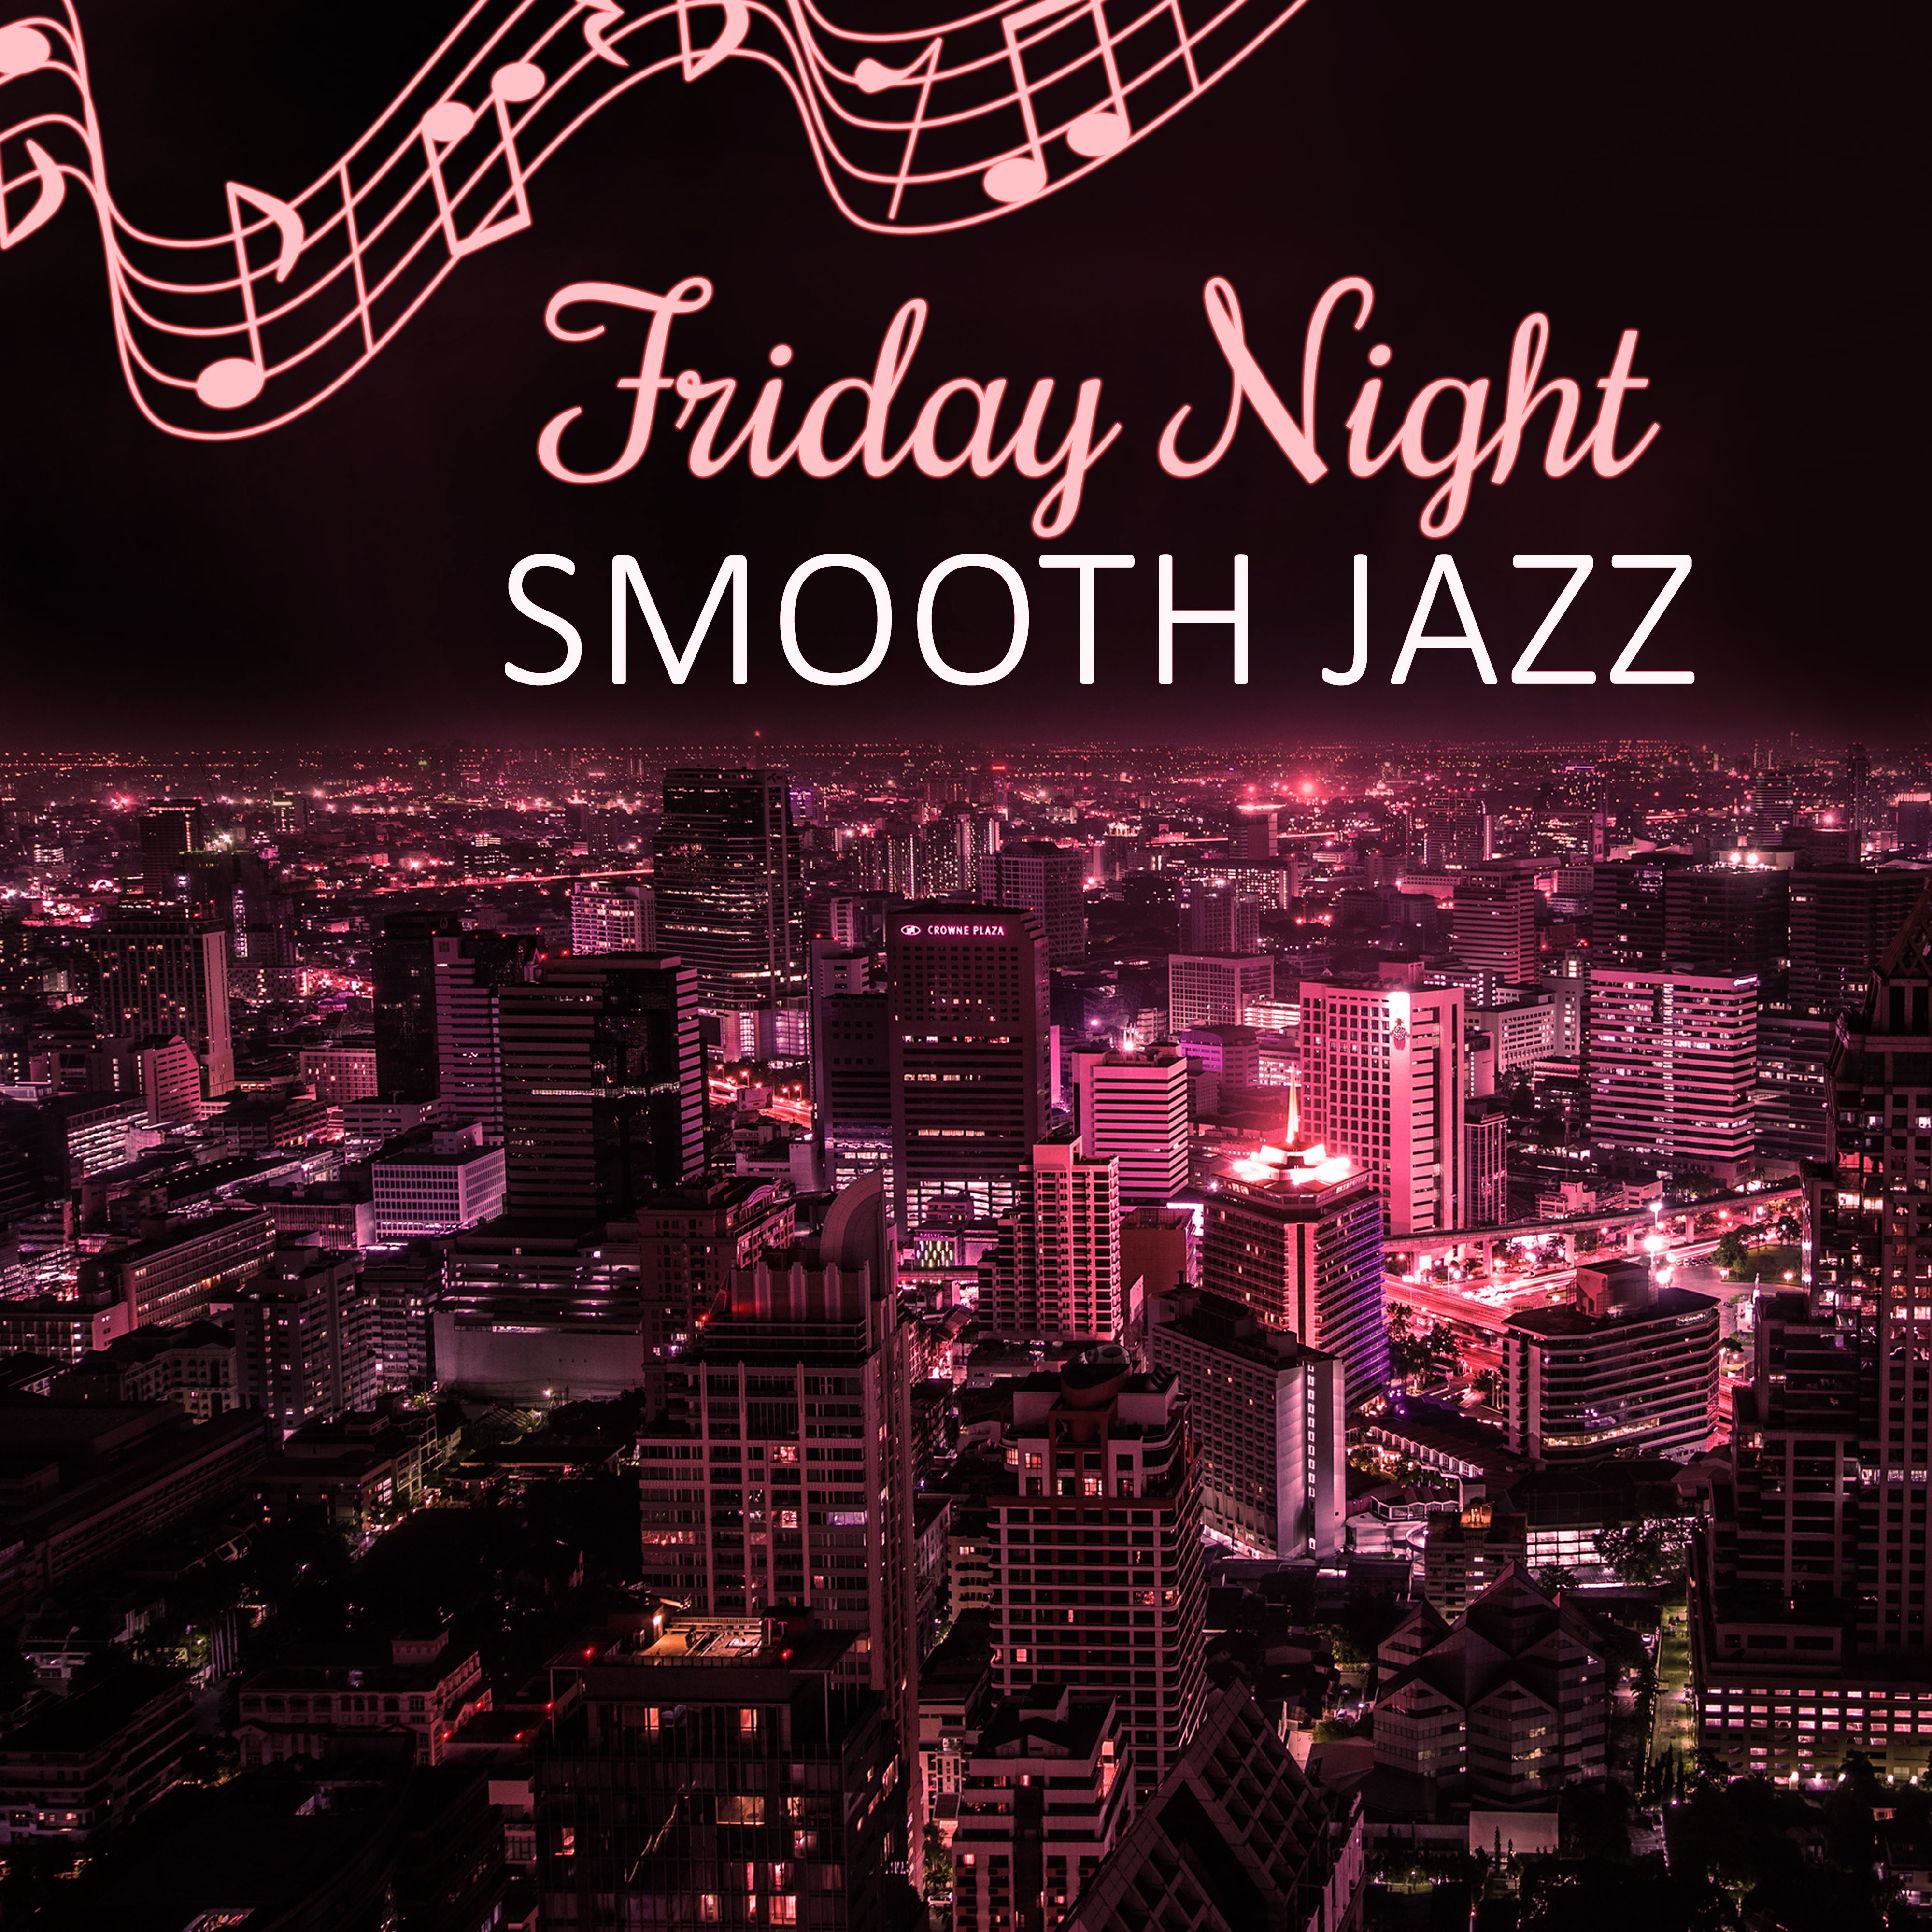 Friday Night Smooth Jazz – Calm Piano, Mellow Jazz, Soothing Sounds, Relaxing Jazz, Piano Sounds for Stress Relief, Background Music to Relax